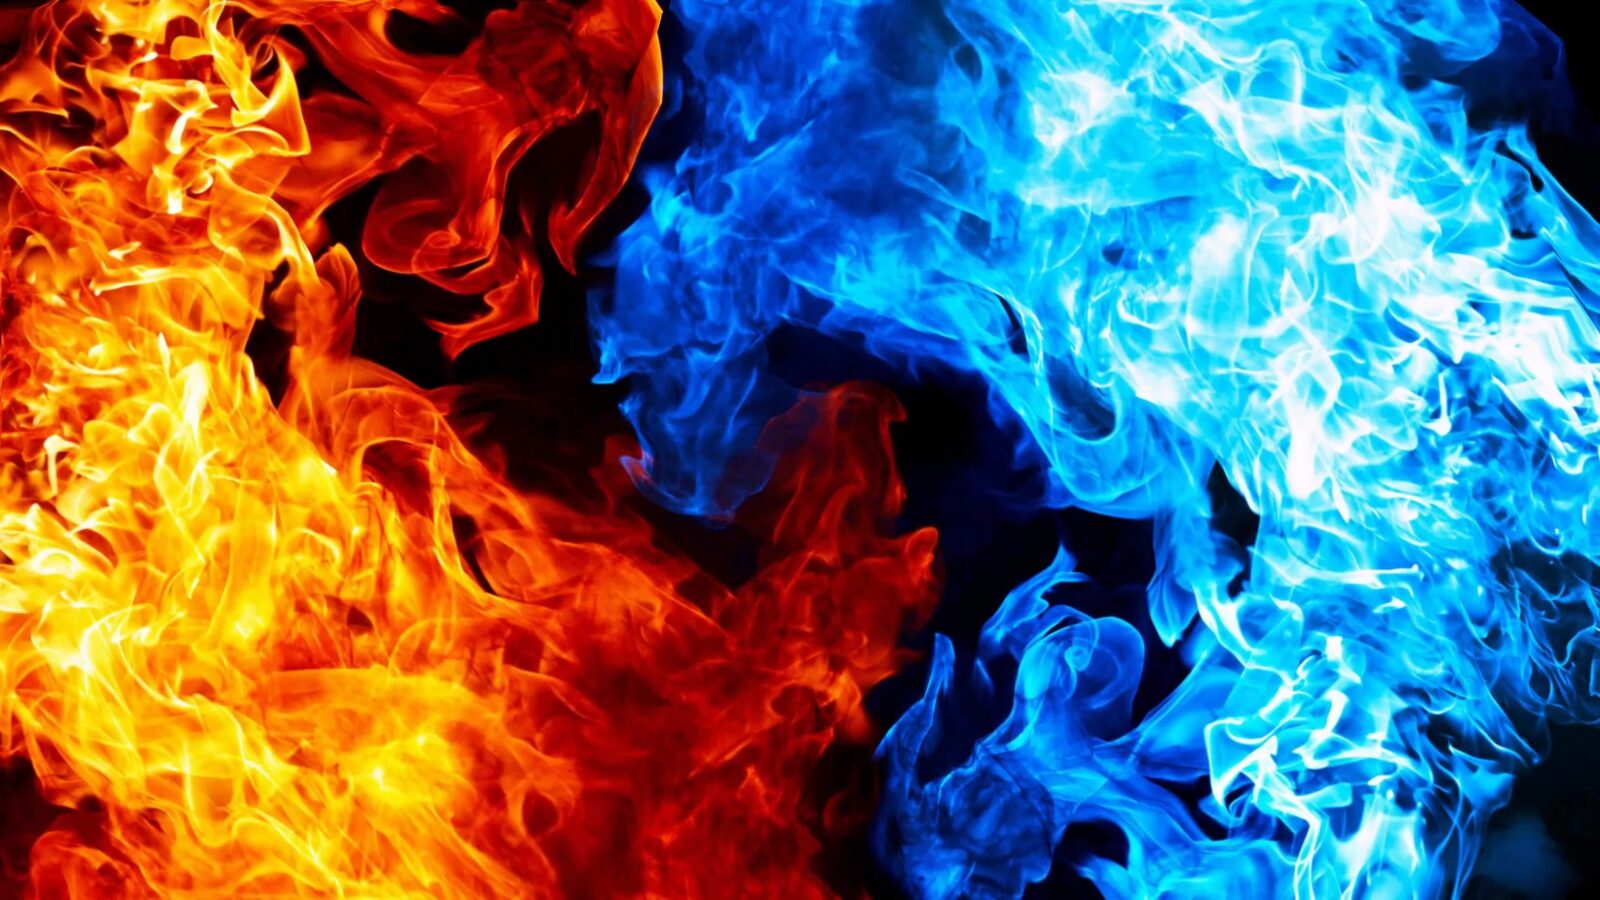 Red Flame Blue Fire 4K Abstract Artwork - Free Live Wallpaper